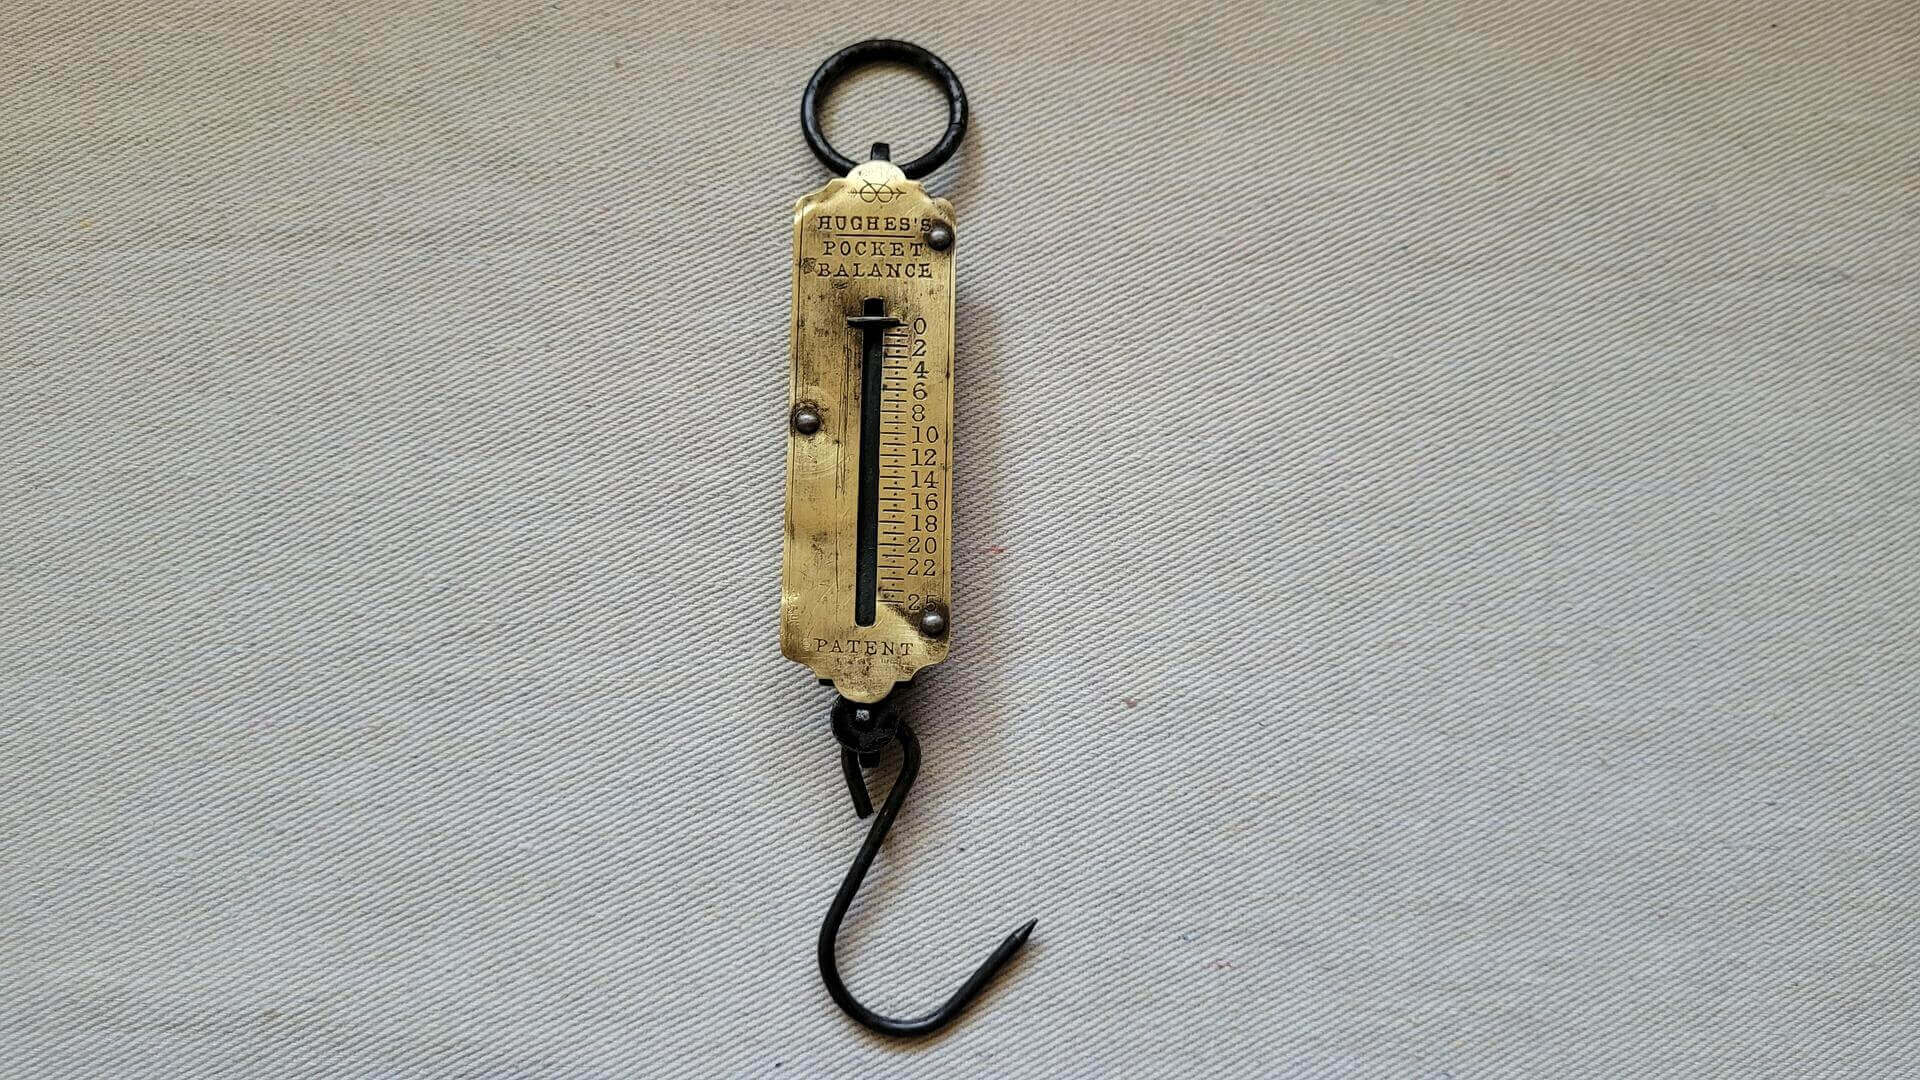 Antique Hughes Brass Pocket Balance Spring Hook Scale 25lbs - Vintage Fishing and Measuring Tools and Collectibles